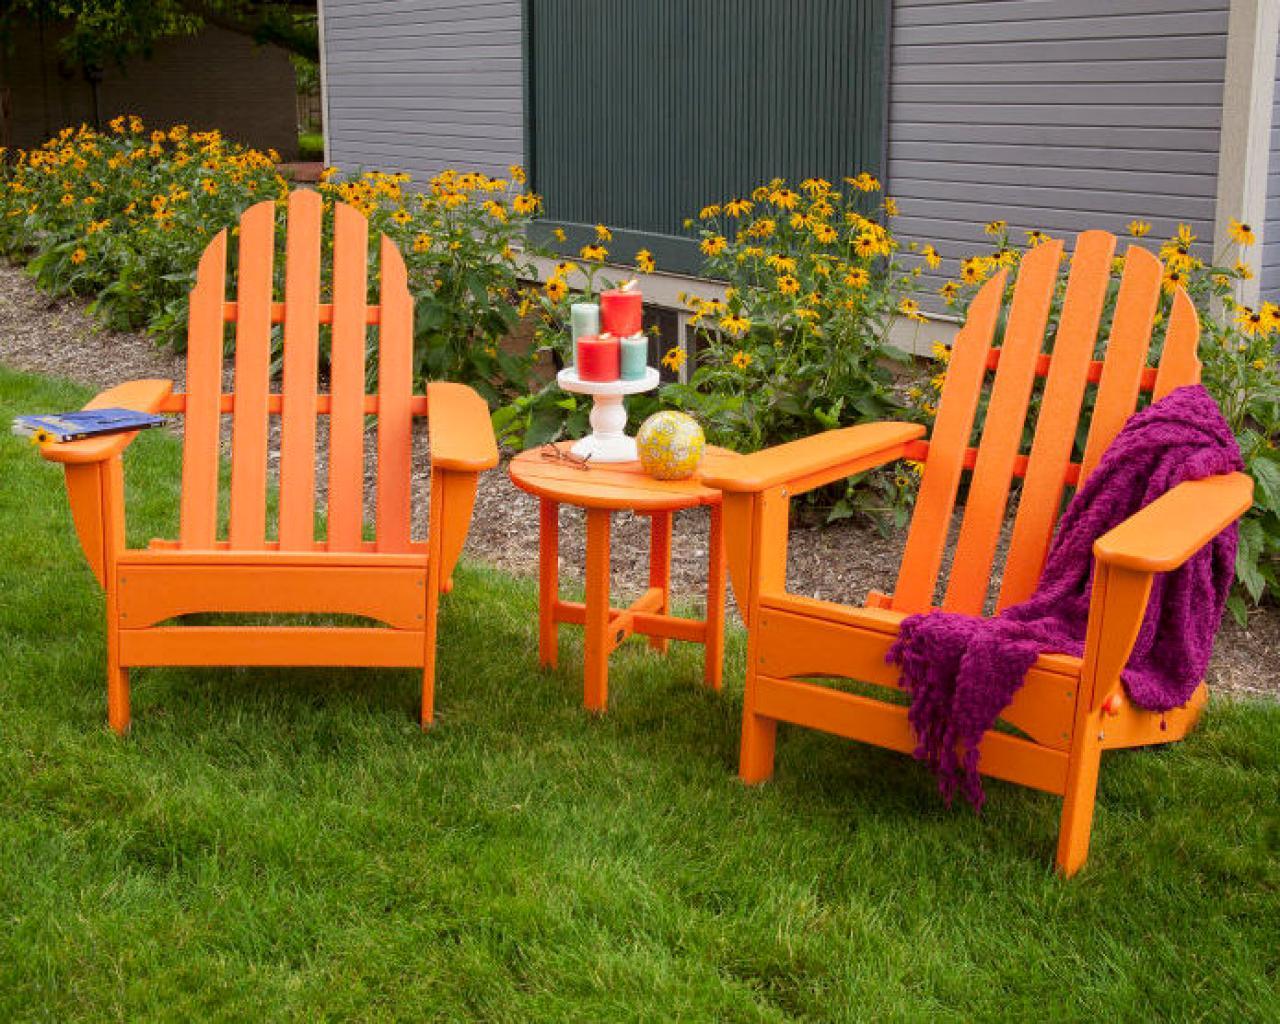 The History of the Adirondack Chair